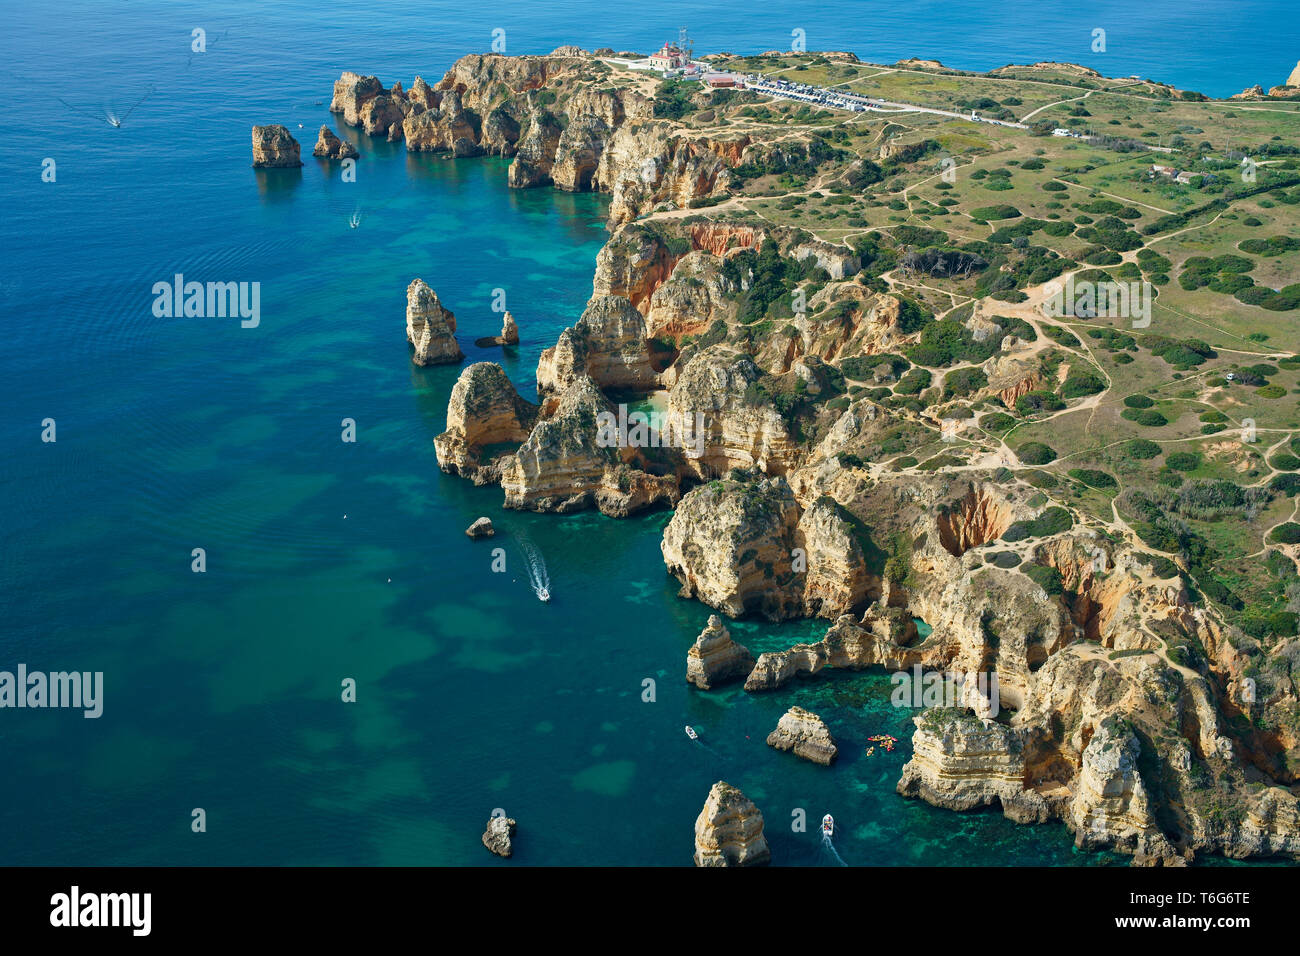 AERIAL VIEW. Deeply eroded seaside landscape with many sinkholes, sea caves and coves. Ponta da Piedade, Lagos, Algarve, Portugal. Stock Photo